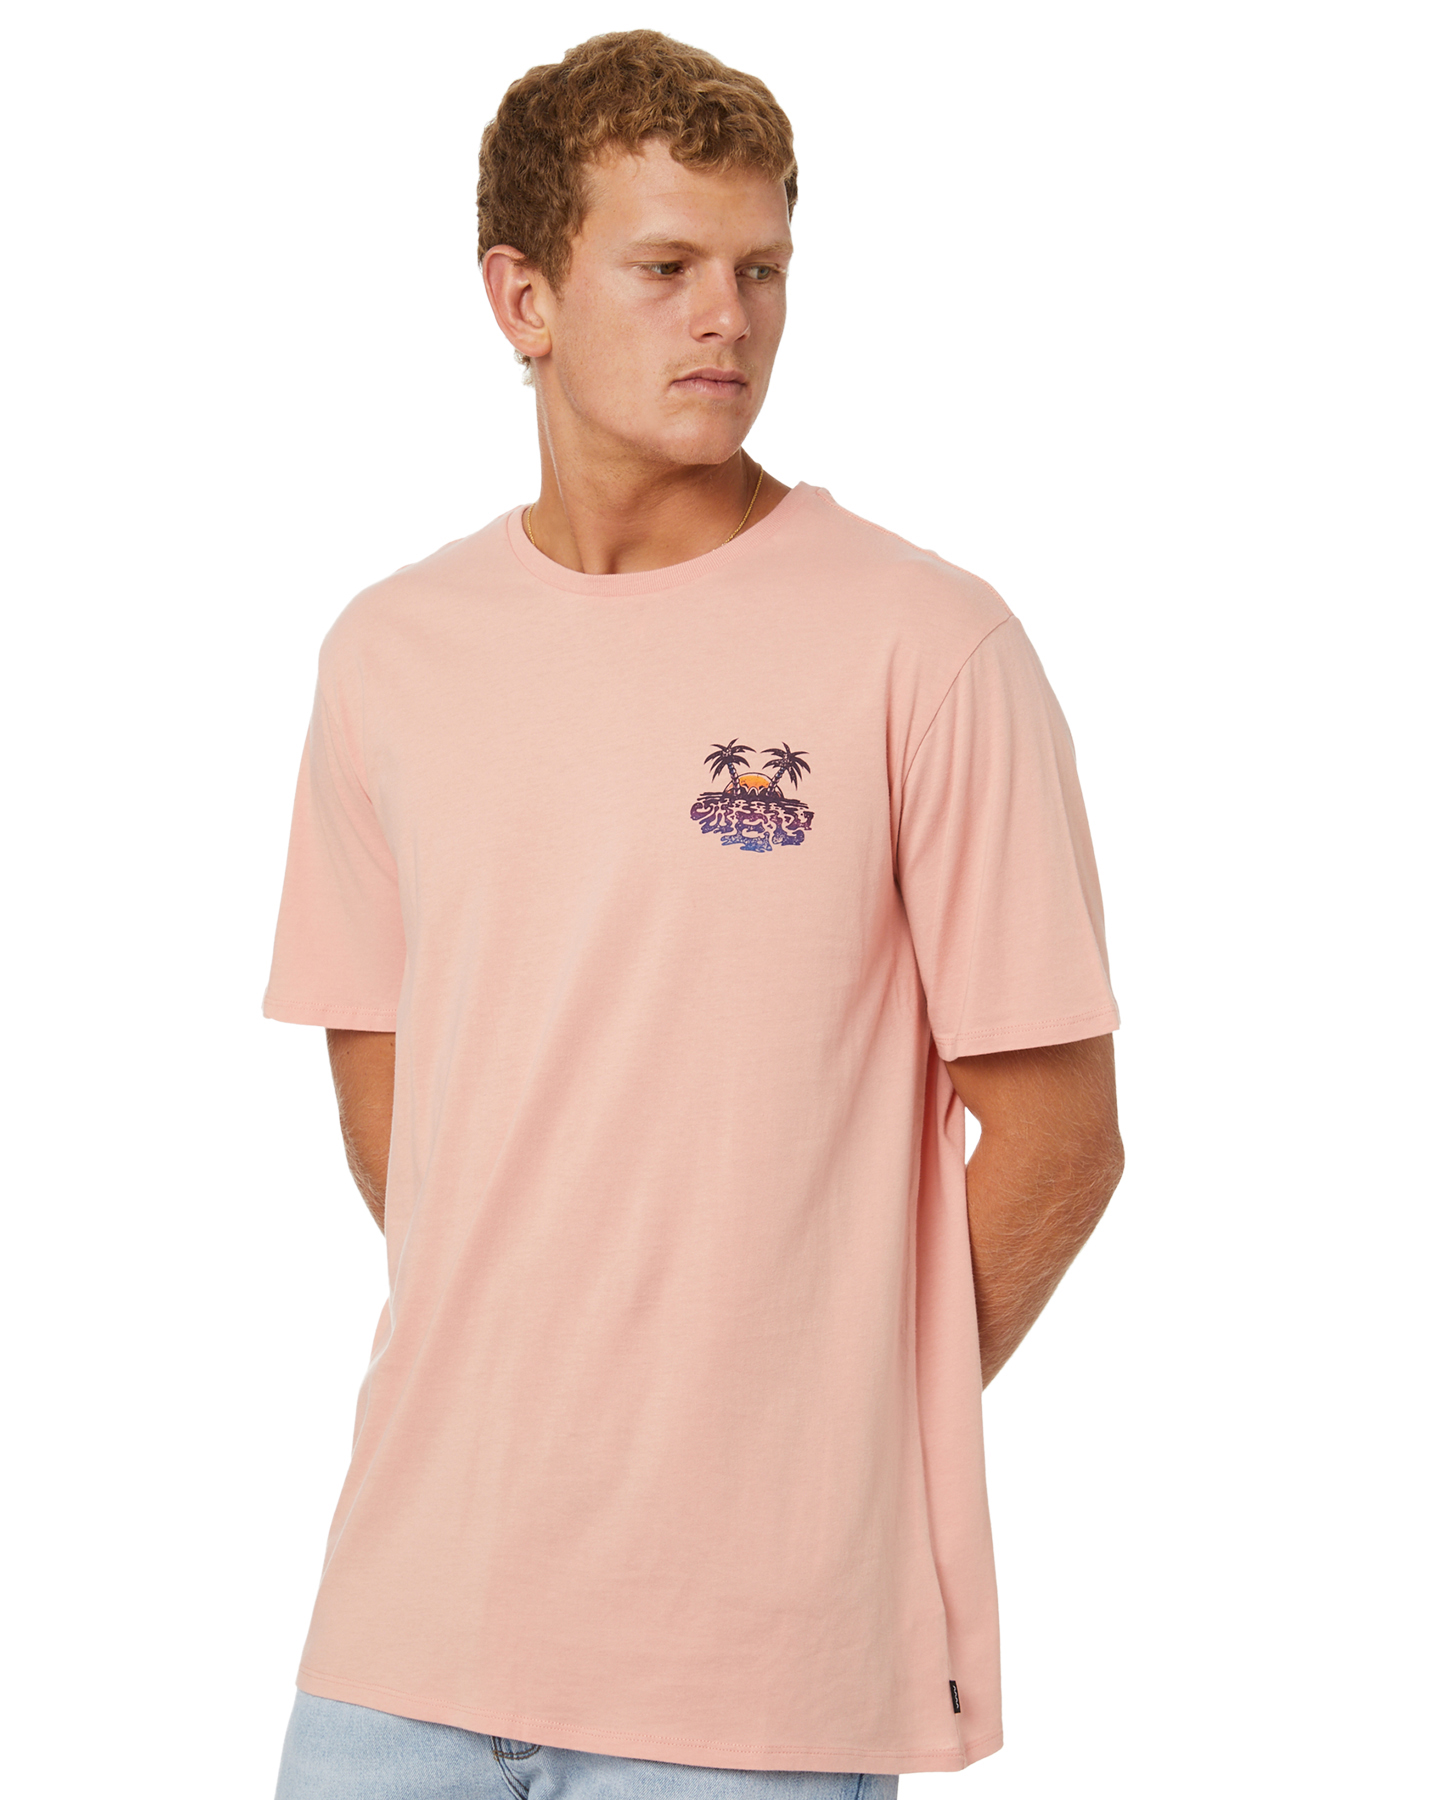 Swell Surge Ss Tee - Coral Dust | SurfStitch